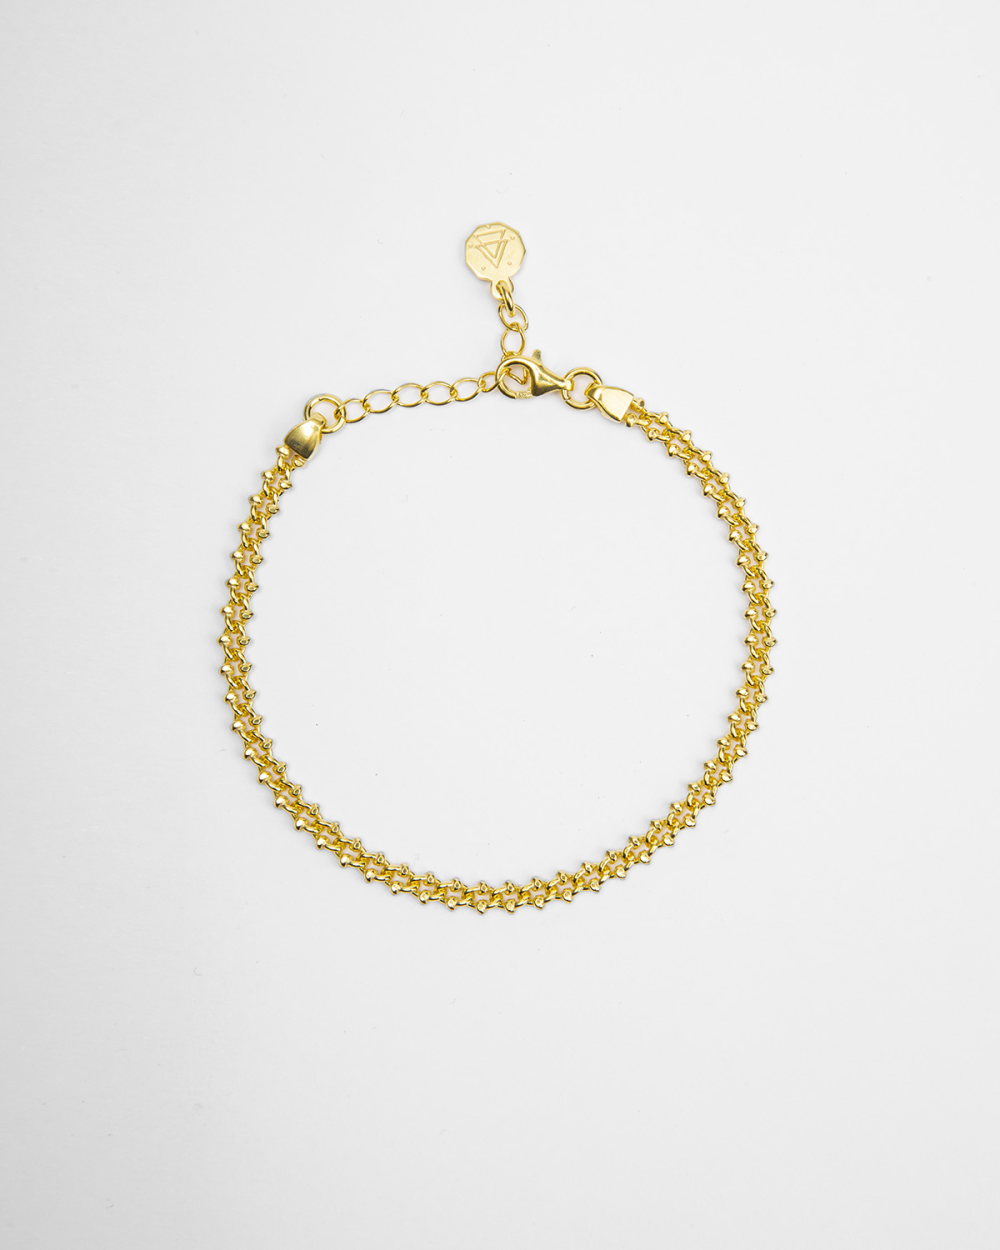 CRAB CHAIN BRACELET / POLISHED YELLOW GOLD